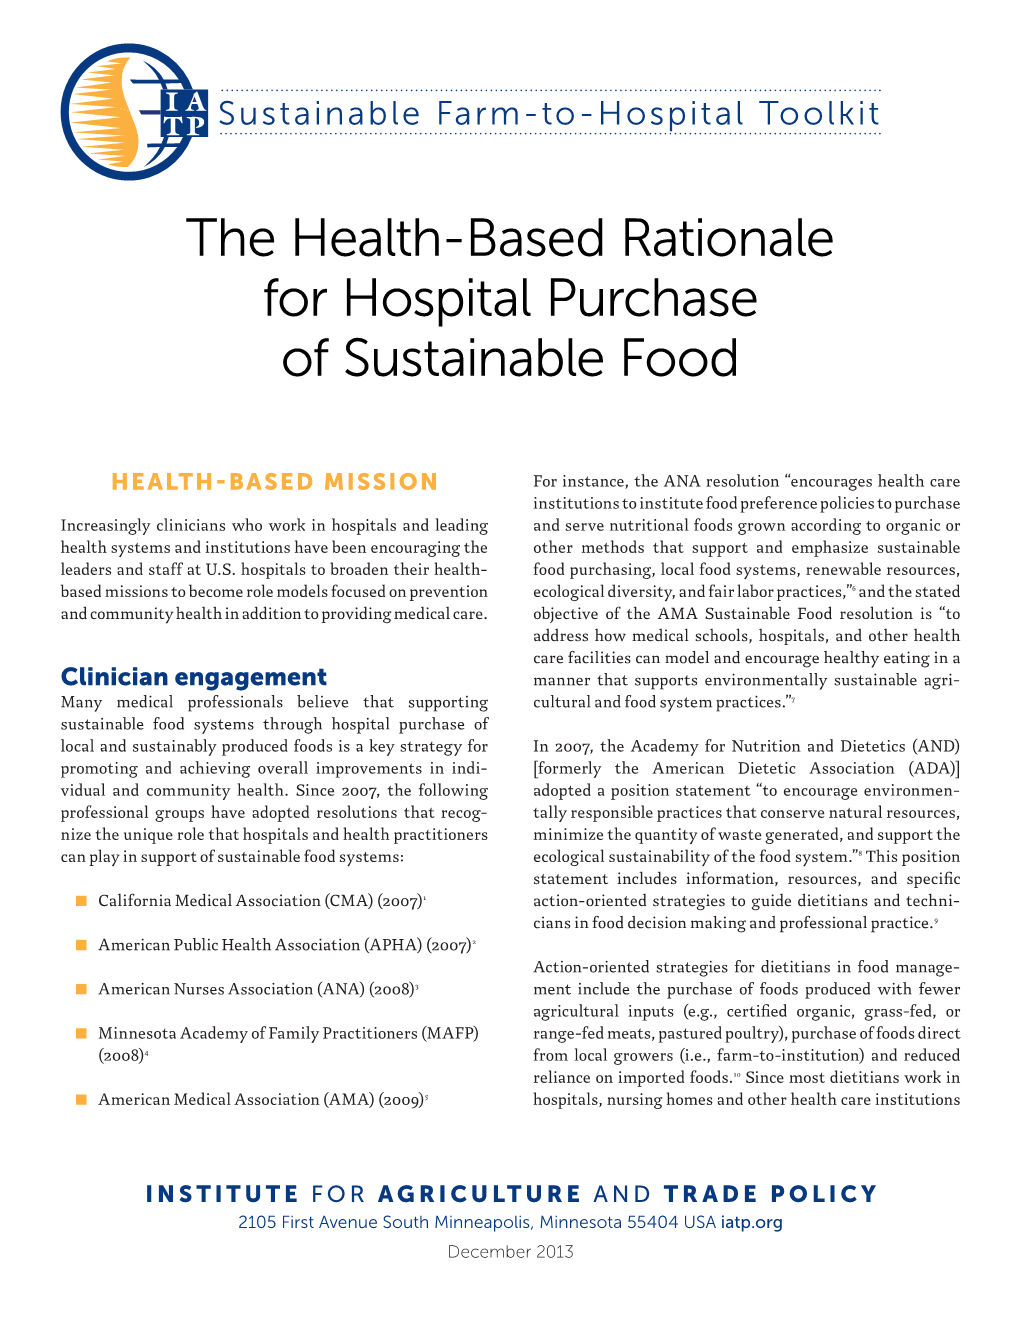 The Health-Based Rationale for Hospital Purchase of Sustainable Food